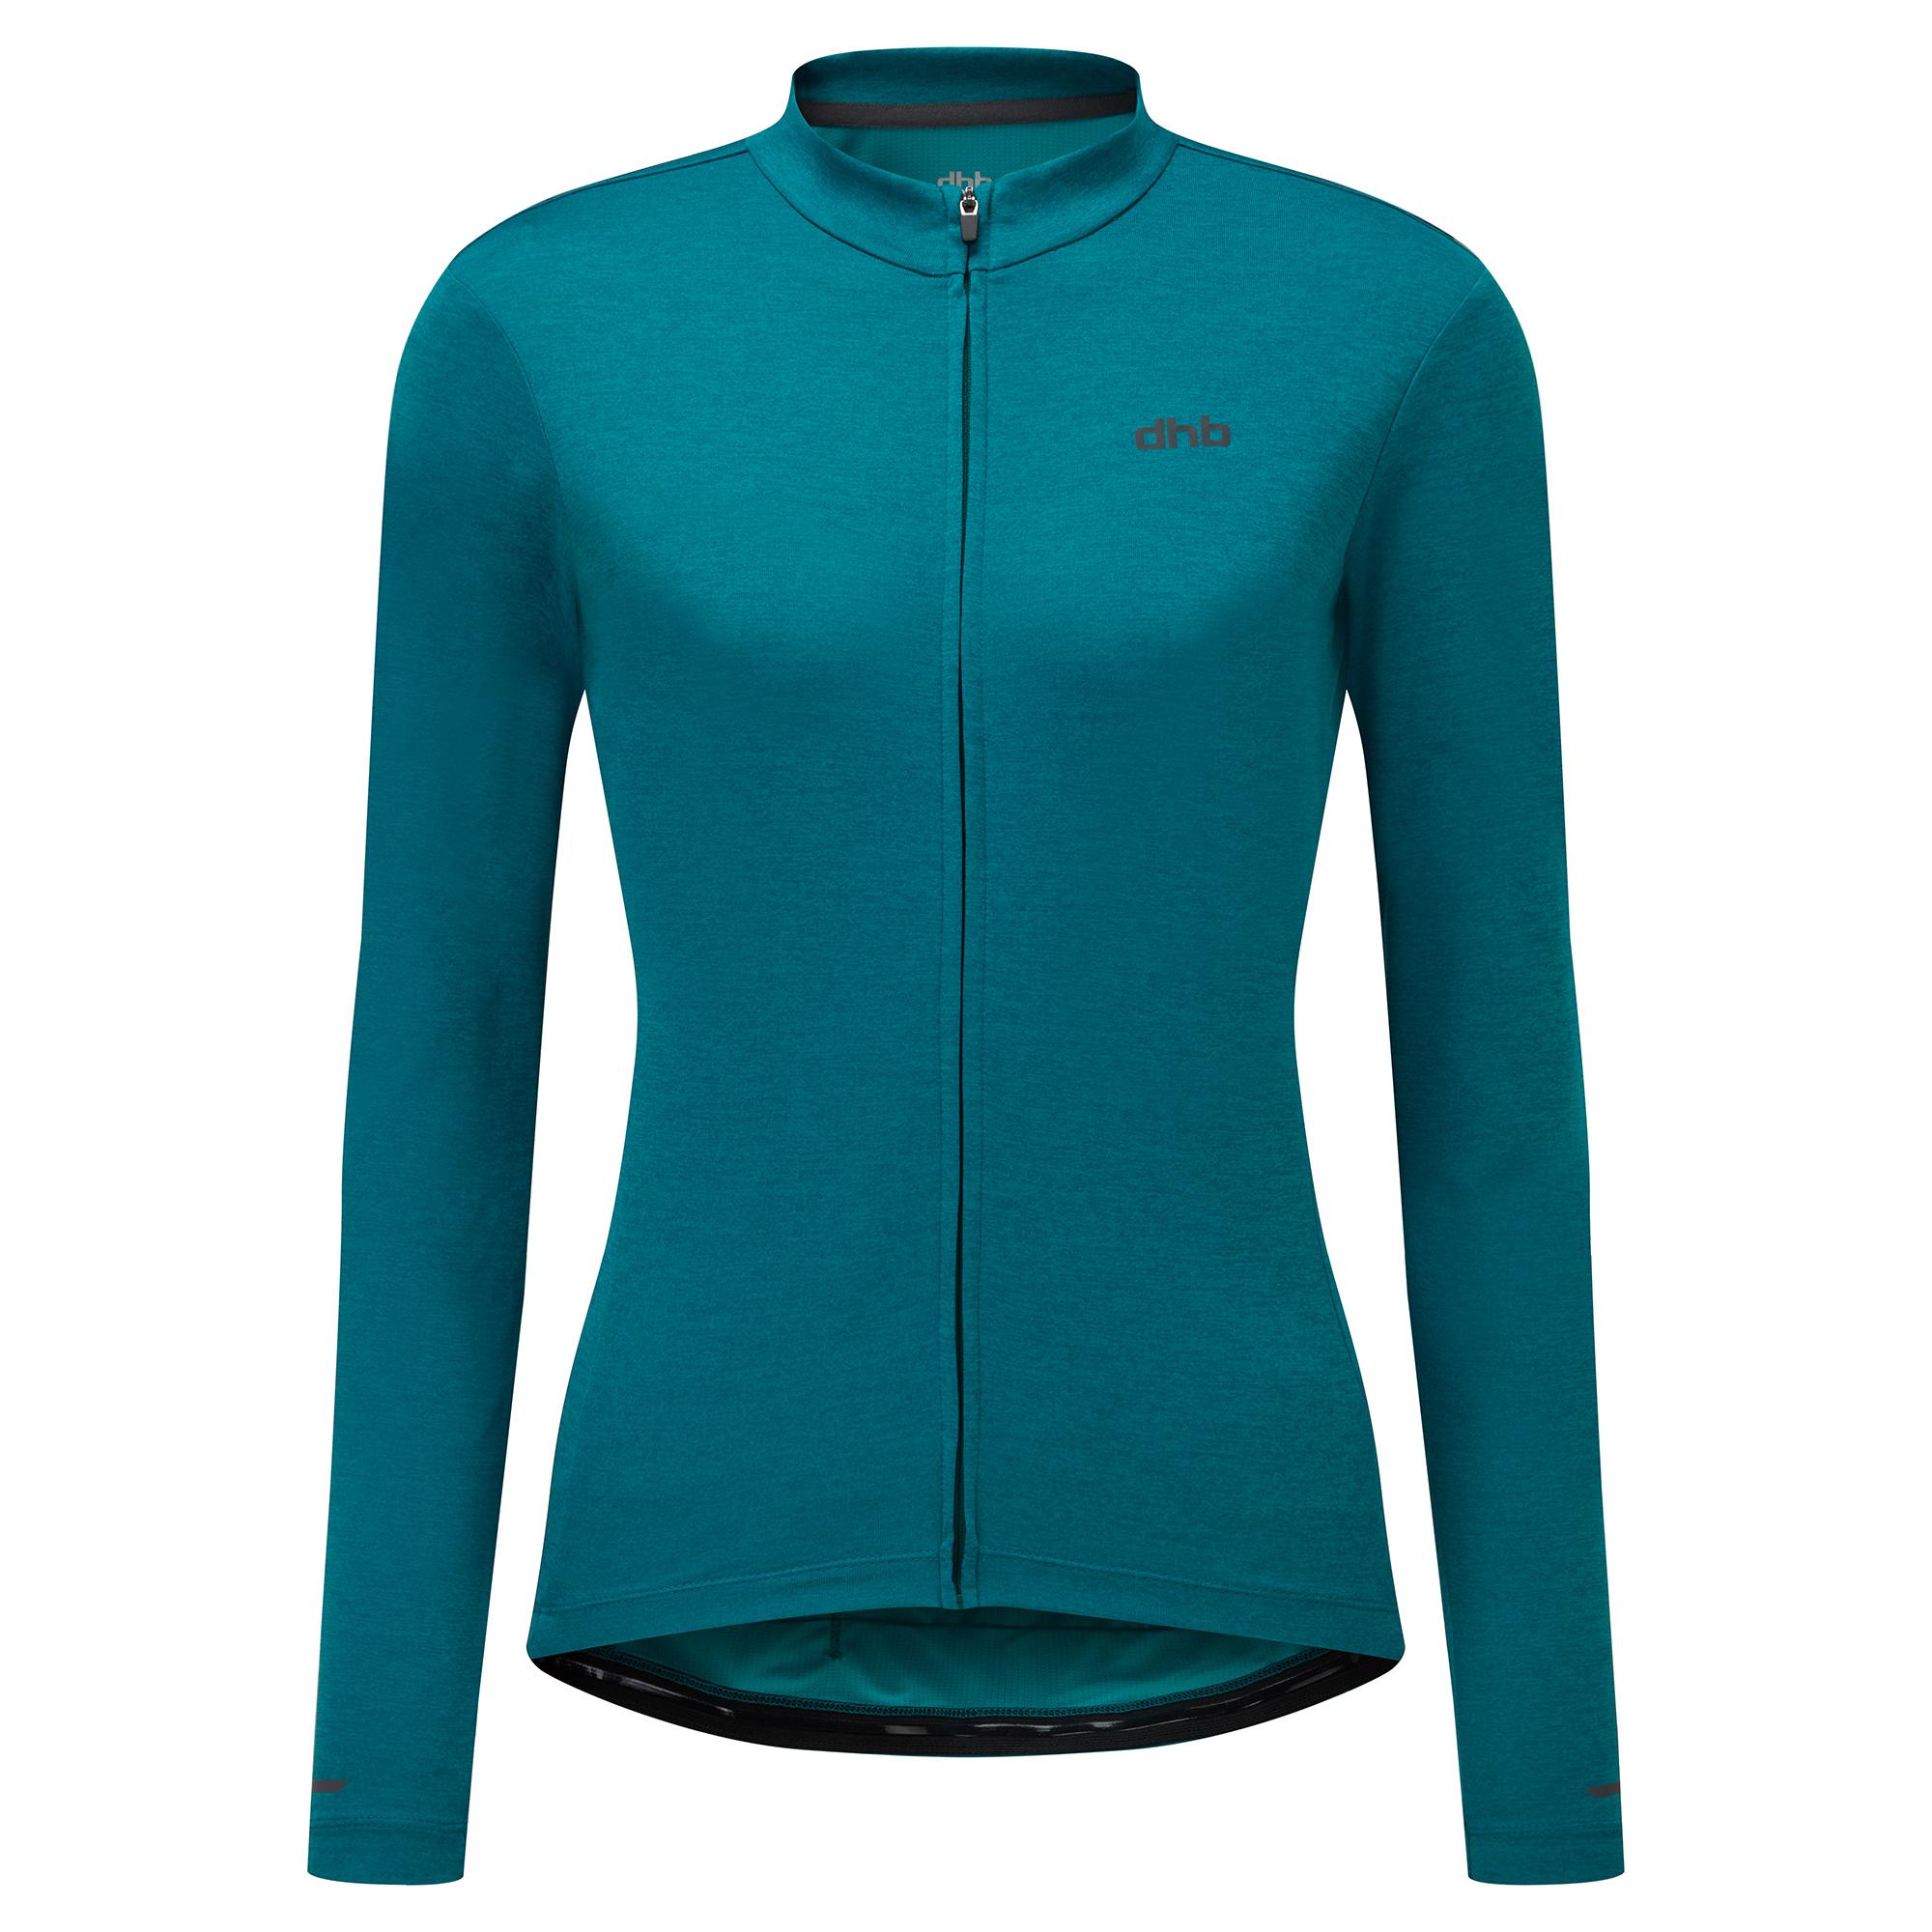 Dhb Womens Long Sleeve Jersey - Turquoise